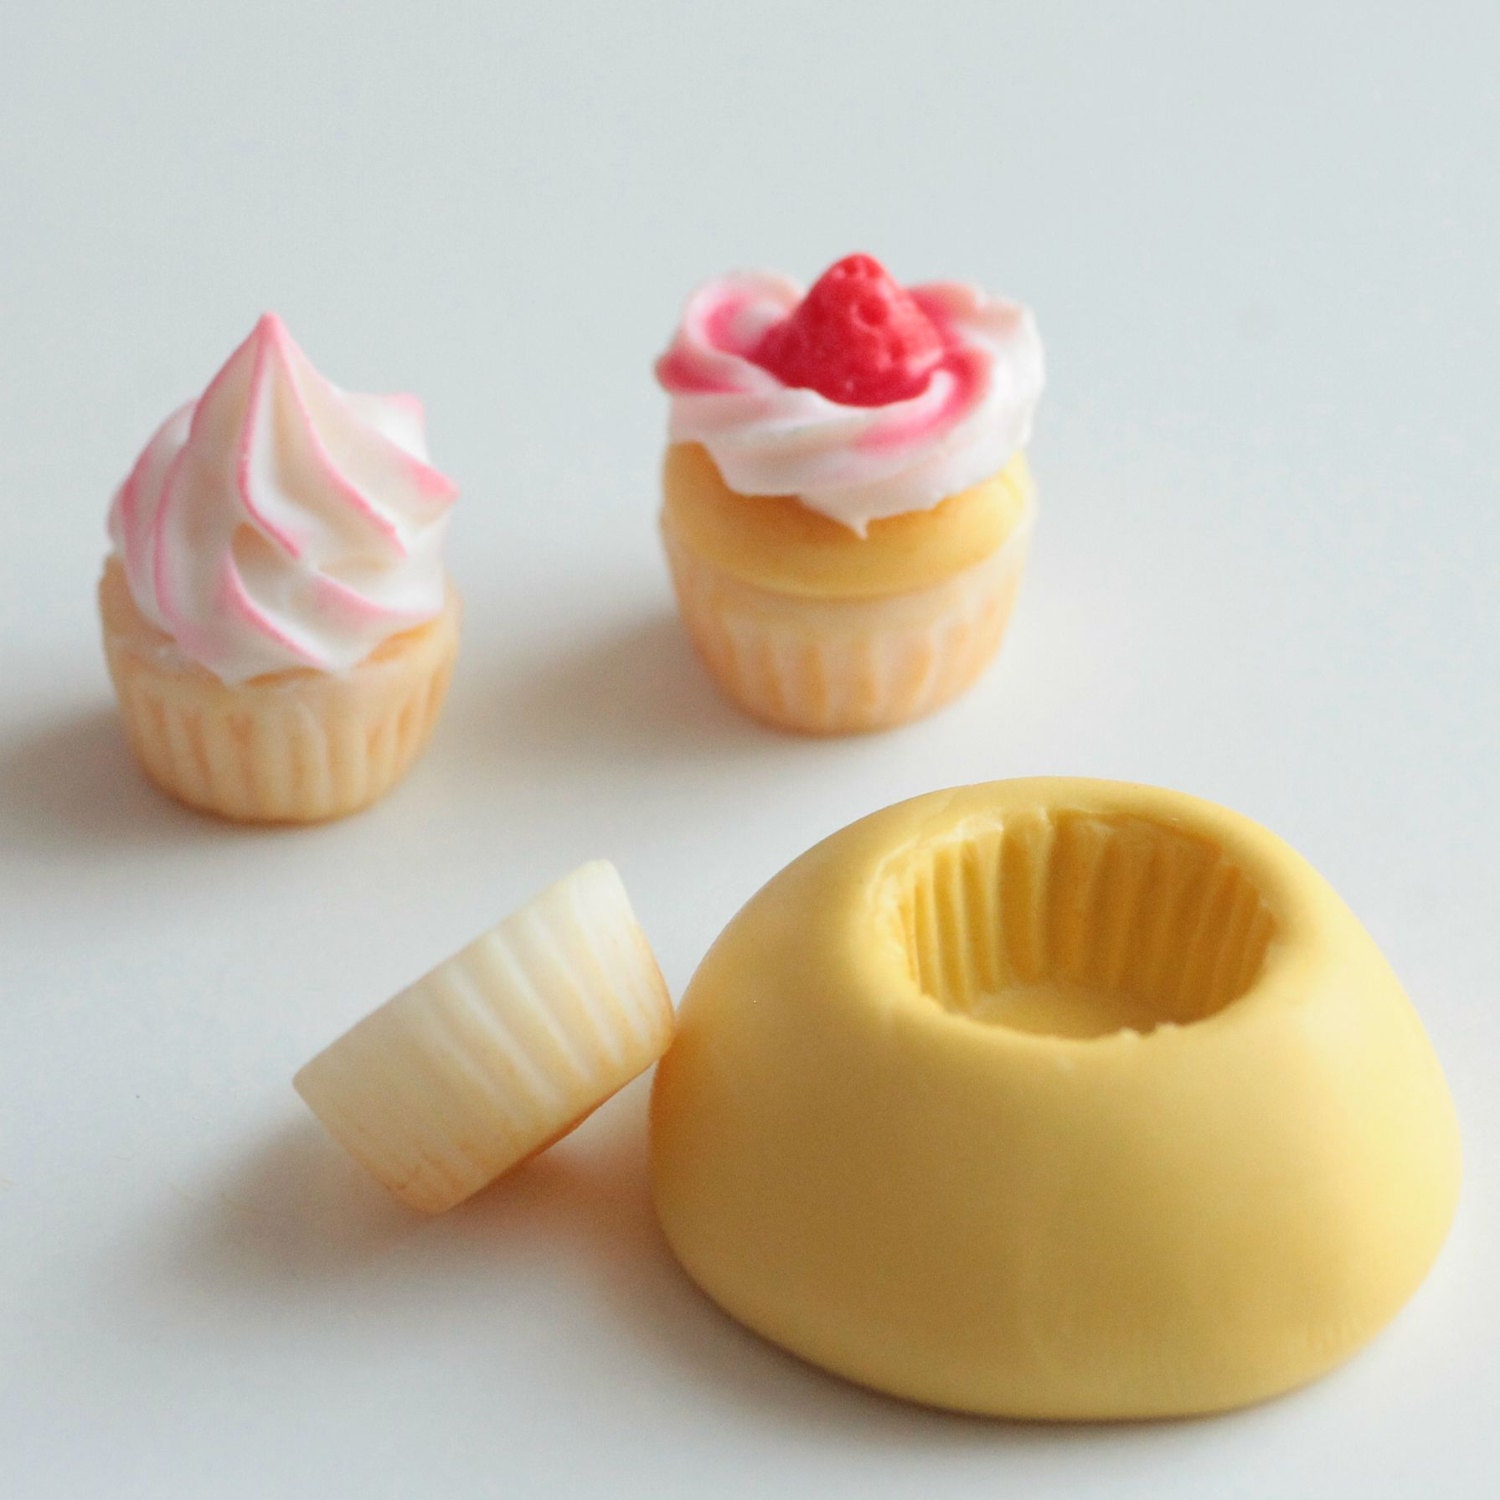 Silicone Molds Baking Muffins  Mini Cupcakes Silicone Molds